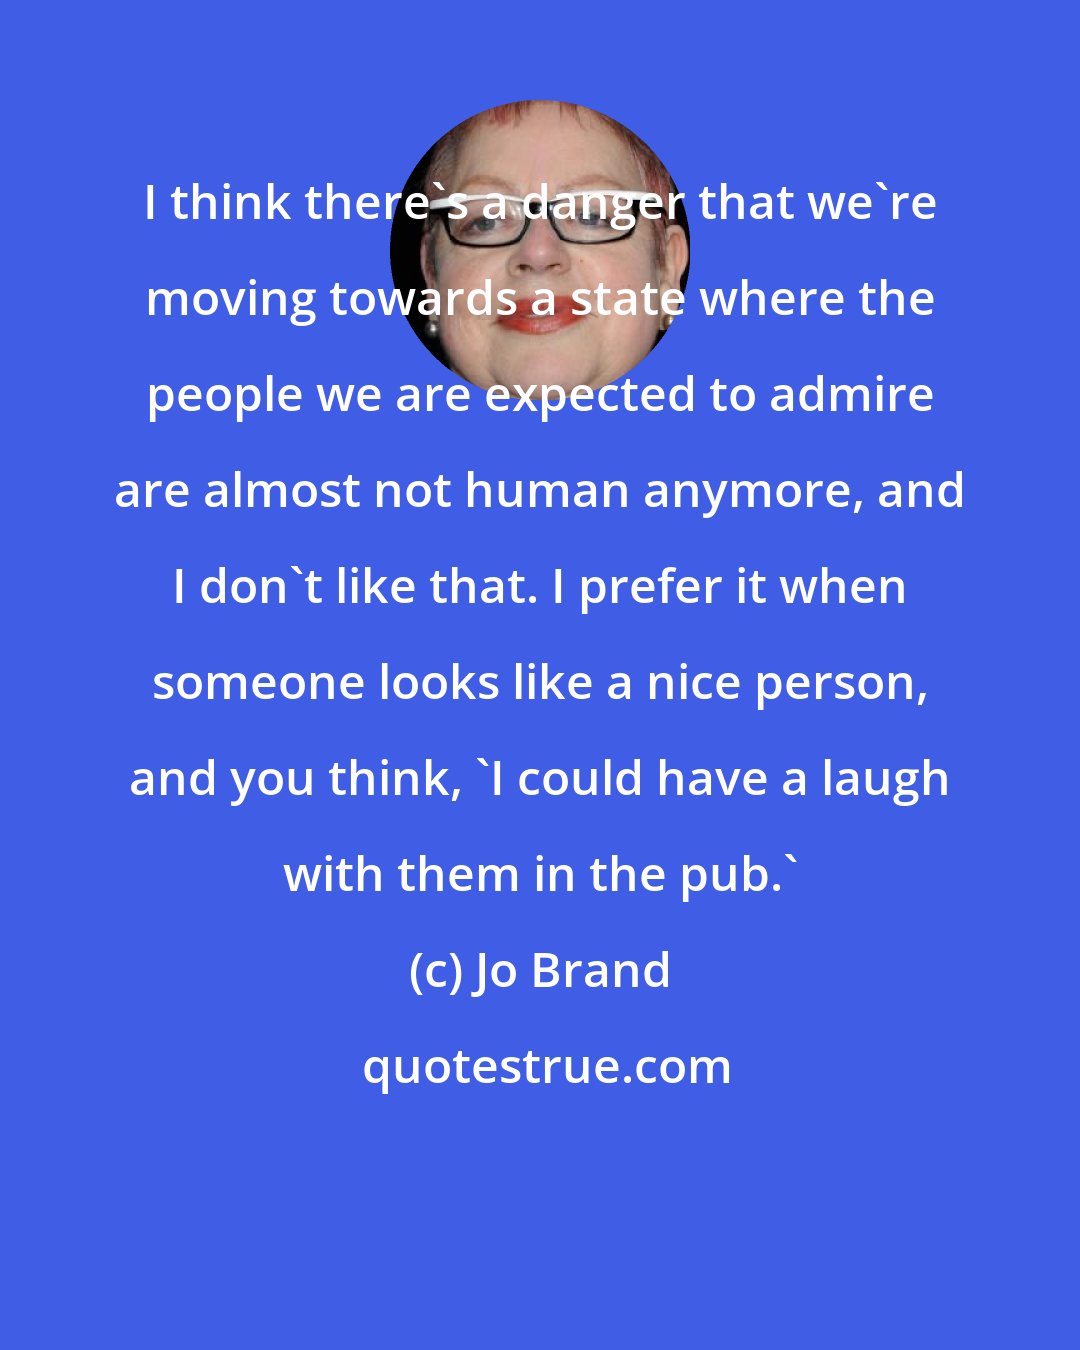 Jo Brand: I think there's a danger that we're moving towards a state where the people we are expected to admire are almost not human anymore, and I don't like that. I prefer it when someone looks like a nice person, and you think, 'I could have a laugh with them in the pub.'